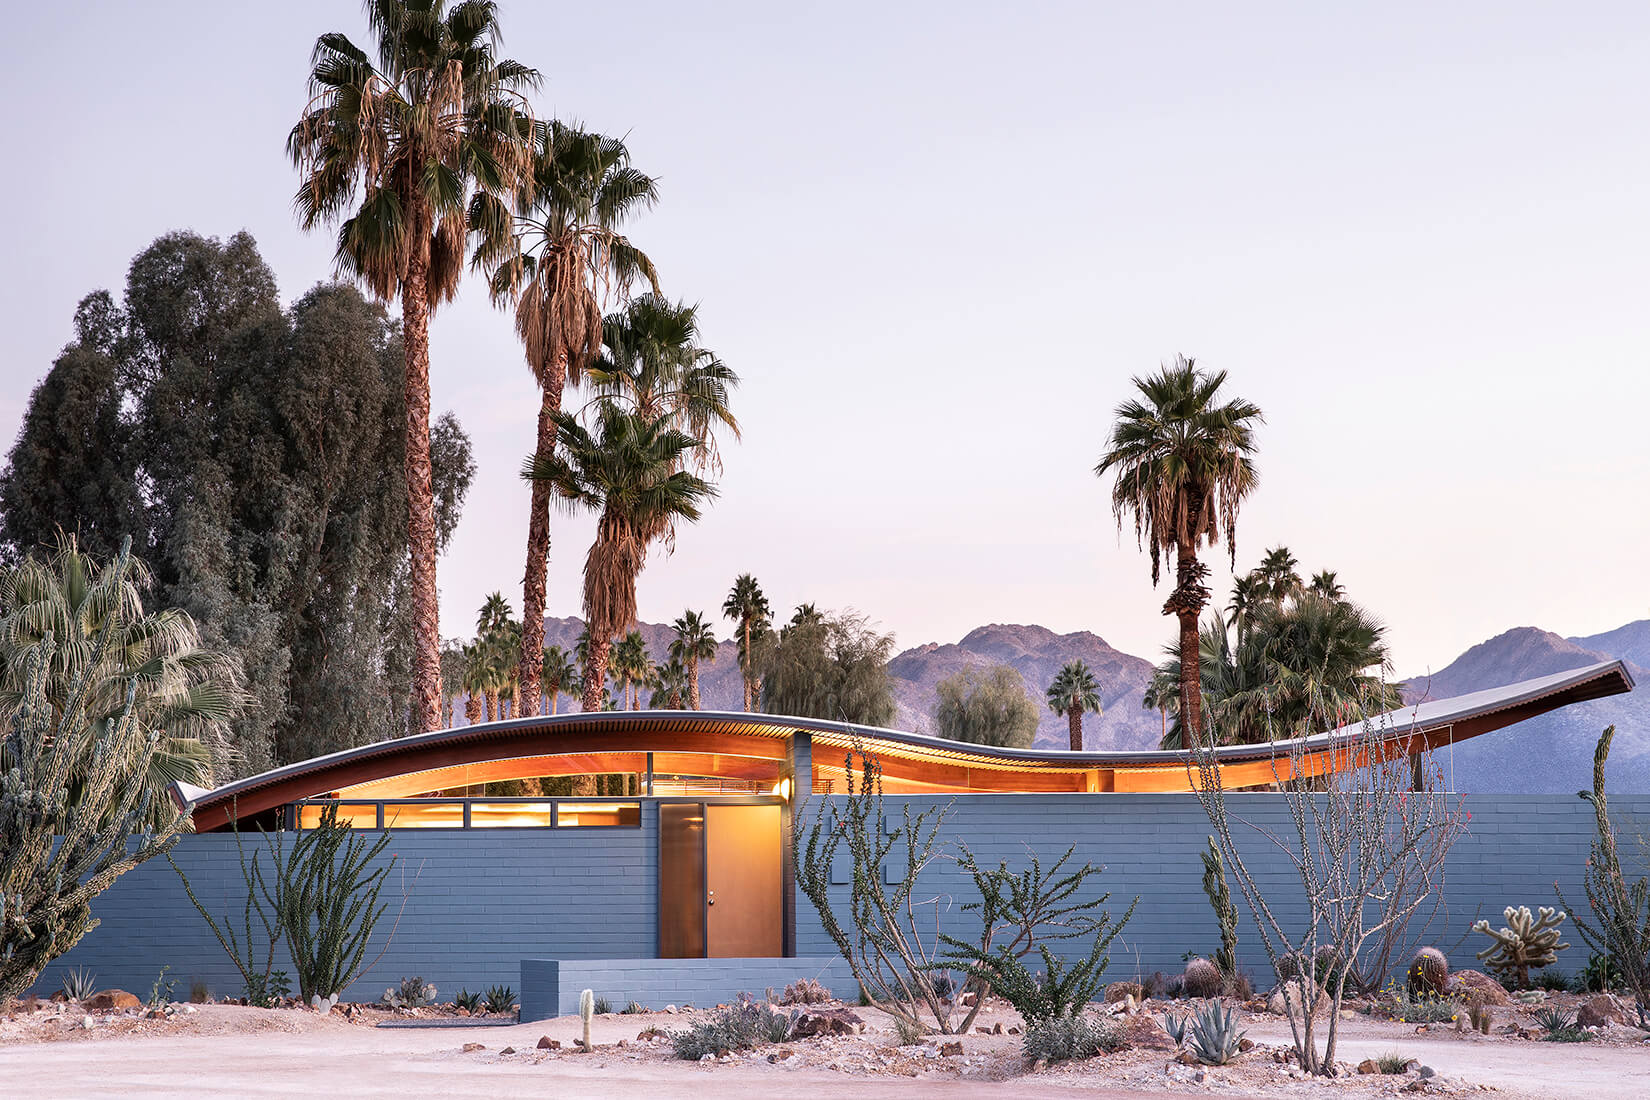 photograph of a midcentury California home with a wavy roof